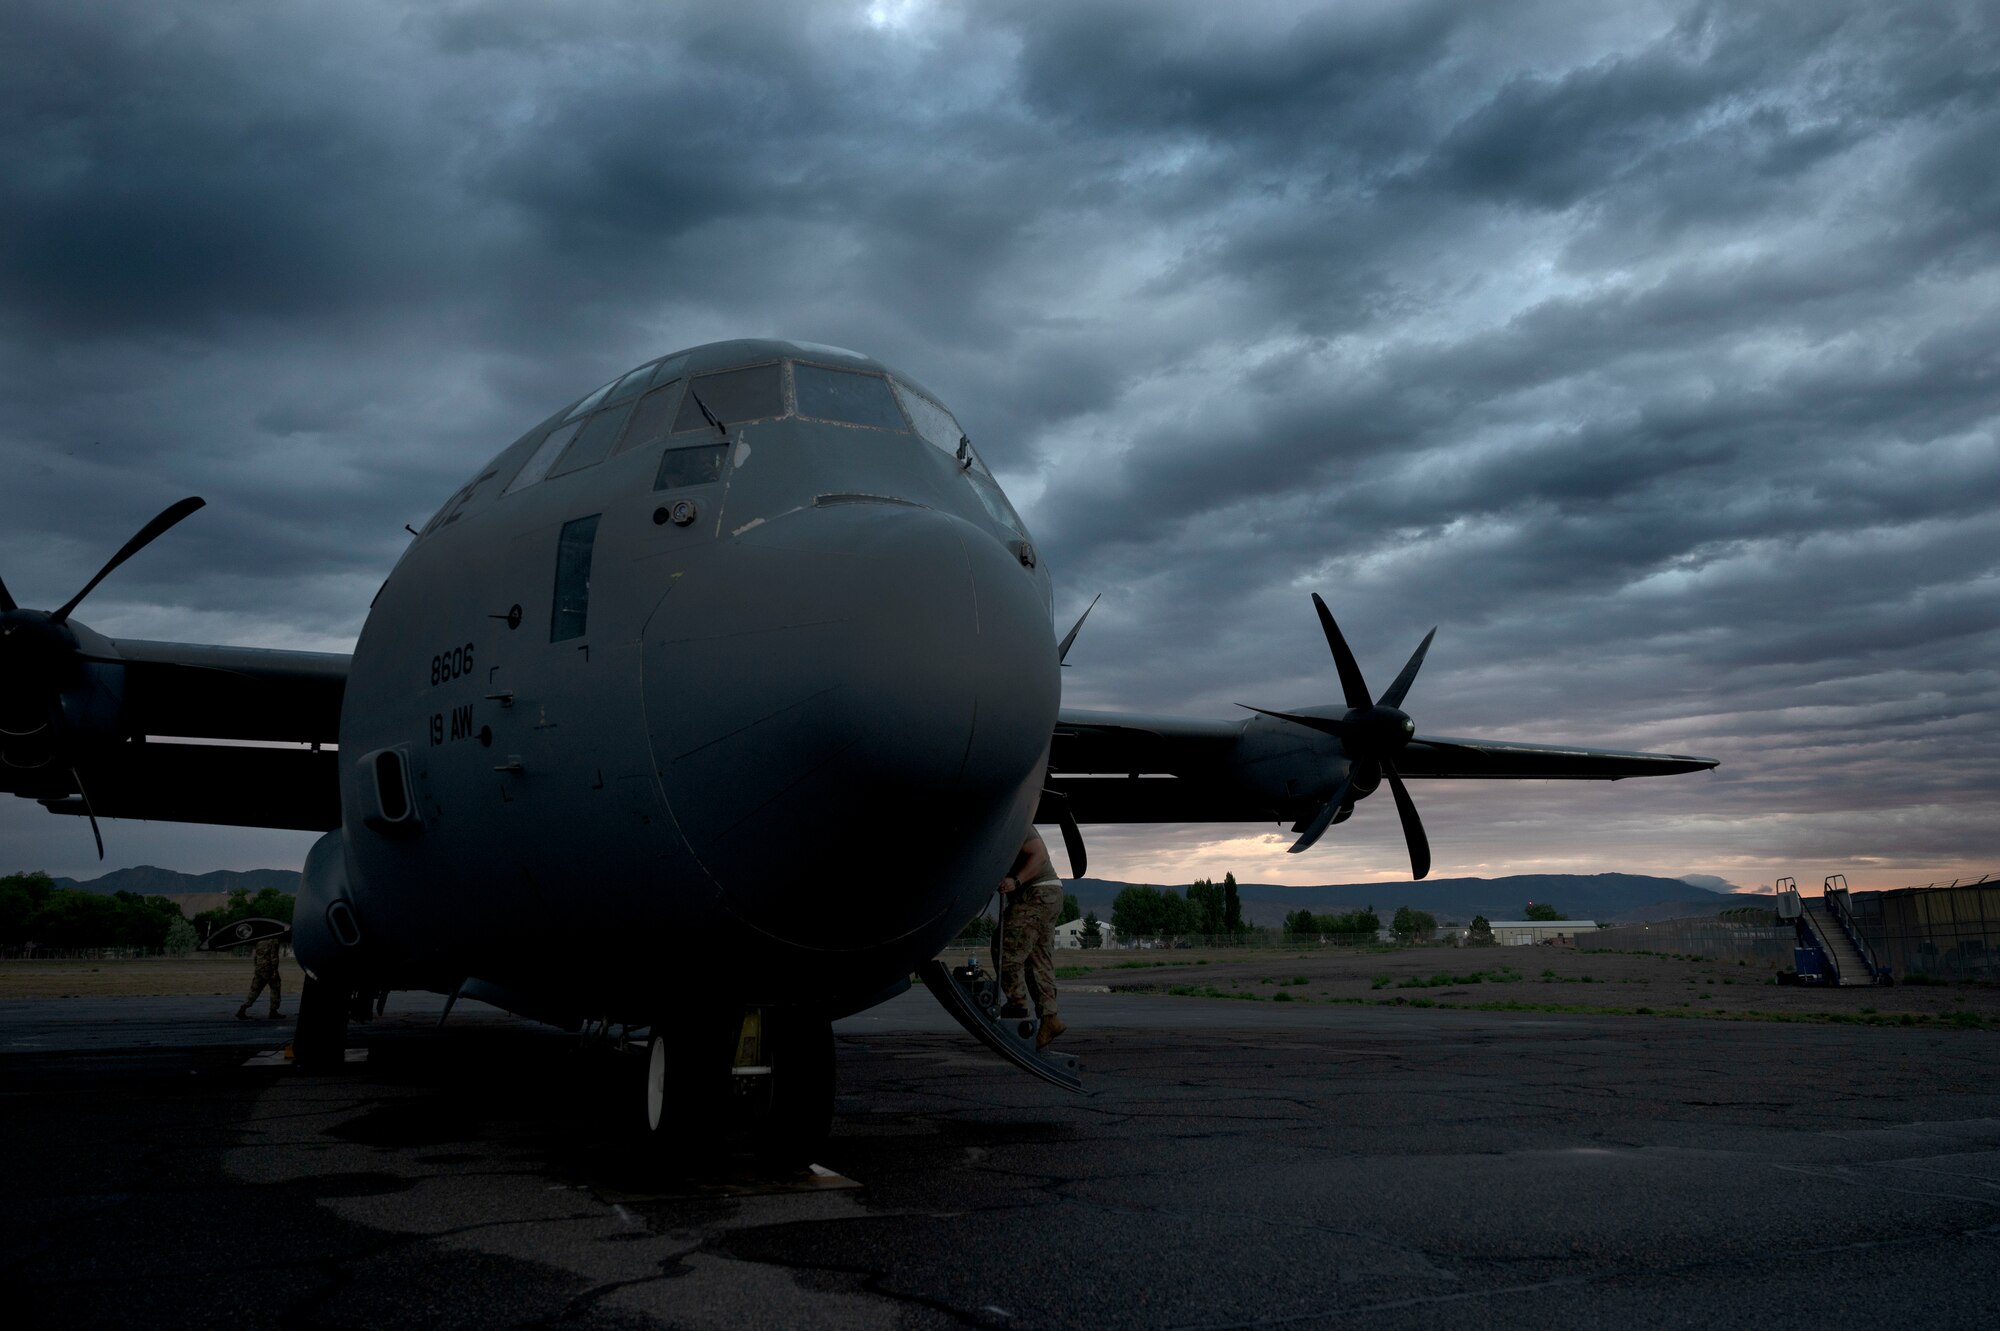 A C-130J Super Hercules assigned to the 19th Airlift Wing is parked on the flightline at Montrose Regional Airport, Colorado, July 28, 2020. Support squadrons in addition to the 41st Airlift Squadron trained in Colorado as a part of the 4/12 deployment initiative, which was developed in 2019 between airlift squadrons from Dyess Air Force Base, Texas and Little Rock AFB. The initiative allows for each squadron a full year of dwell time followed by a four-month rotation to their respective area of responsibility. (U.S. Air Force photo by Senior Airman Kristine M. Gruwell)